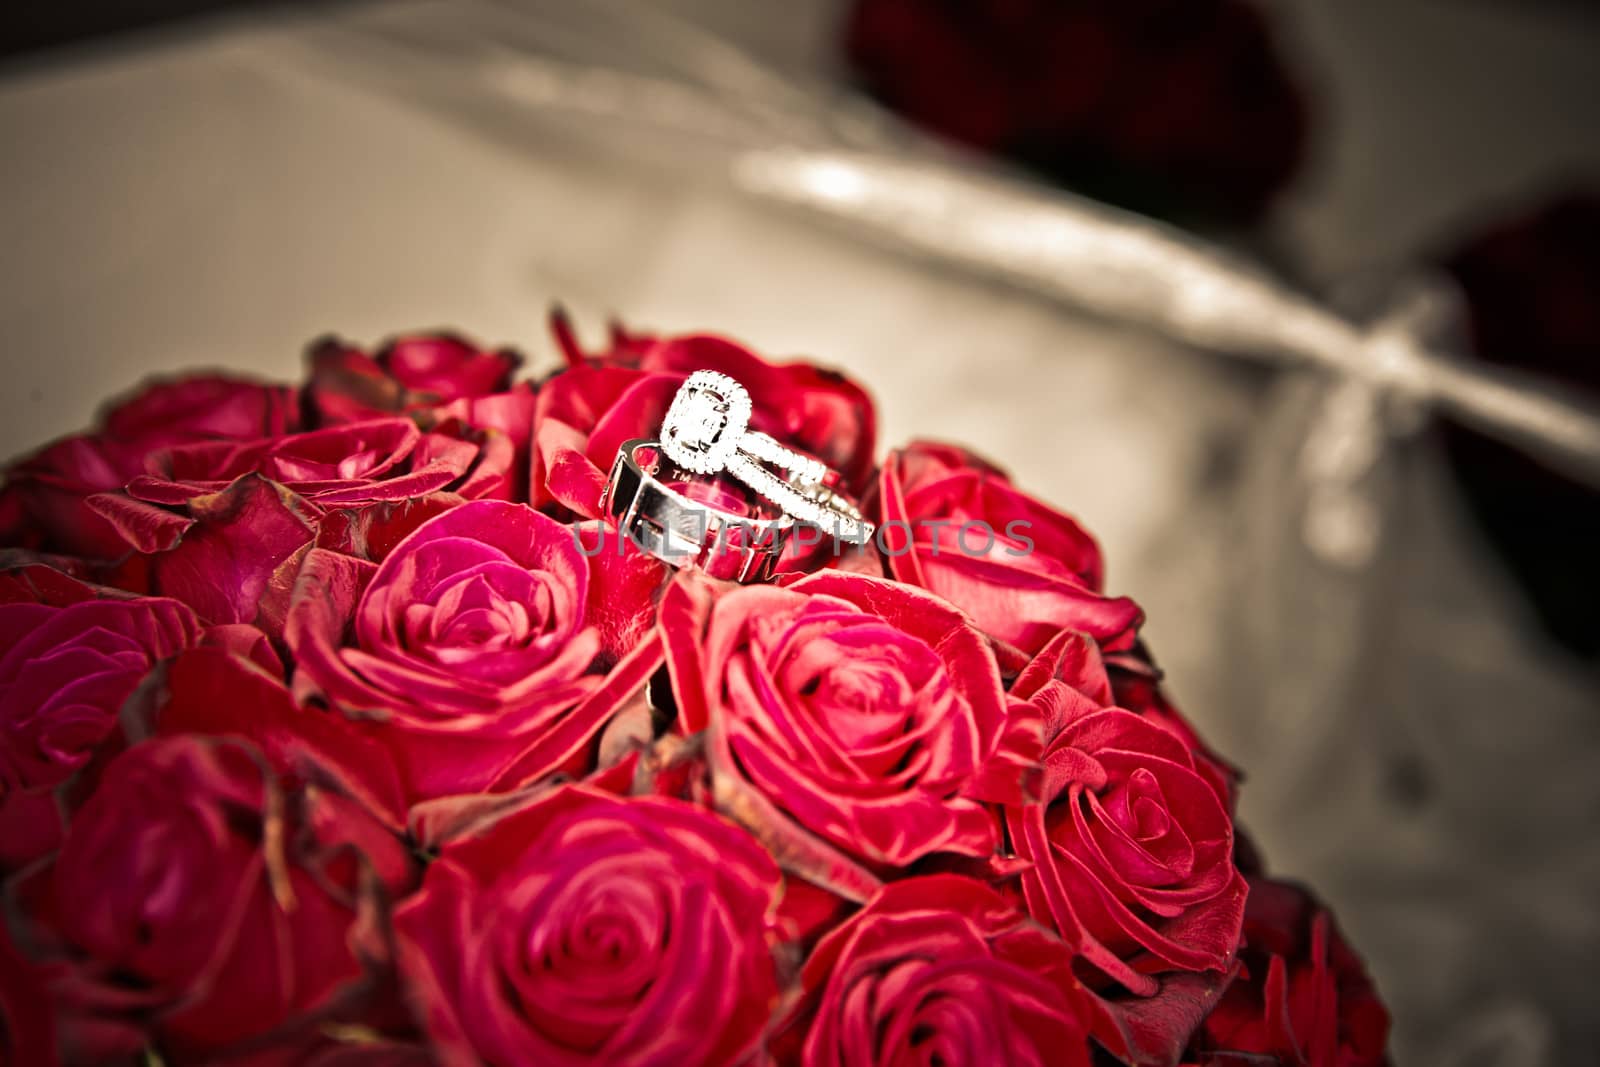 Decorative wedding rings on a posy of fresh red roses signifying love, antique look toned image